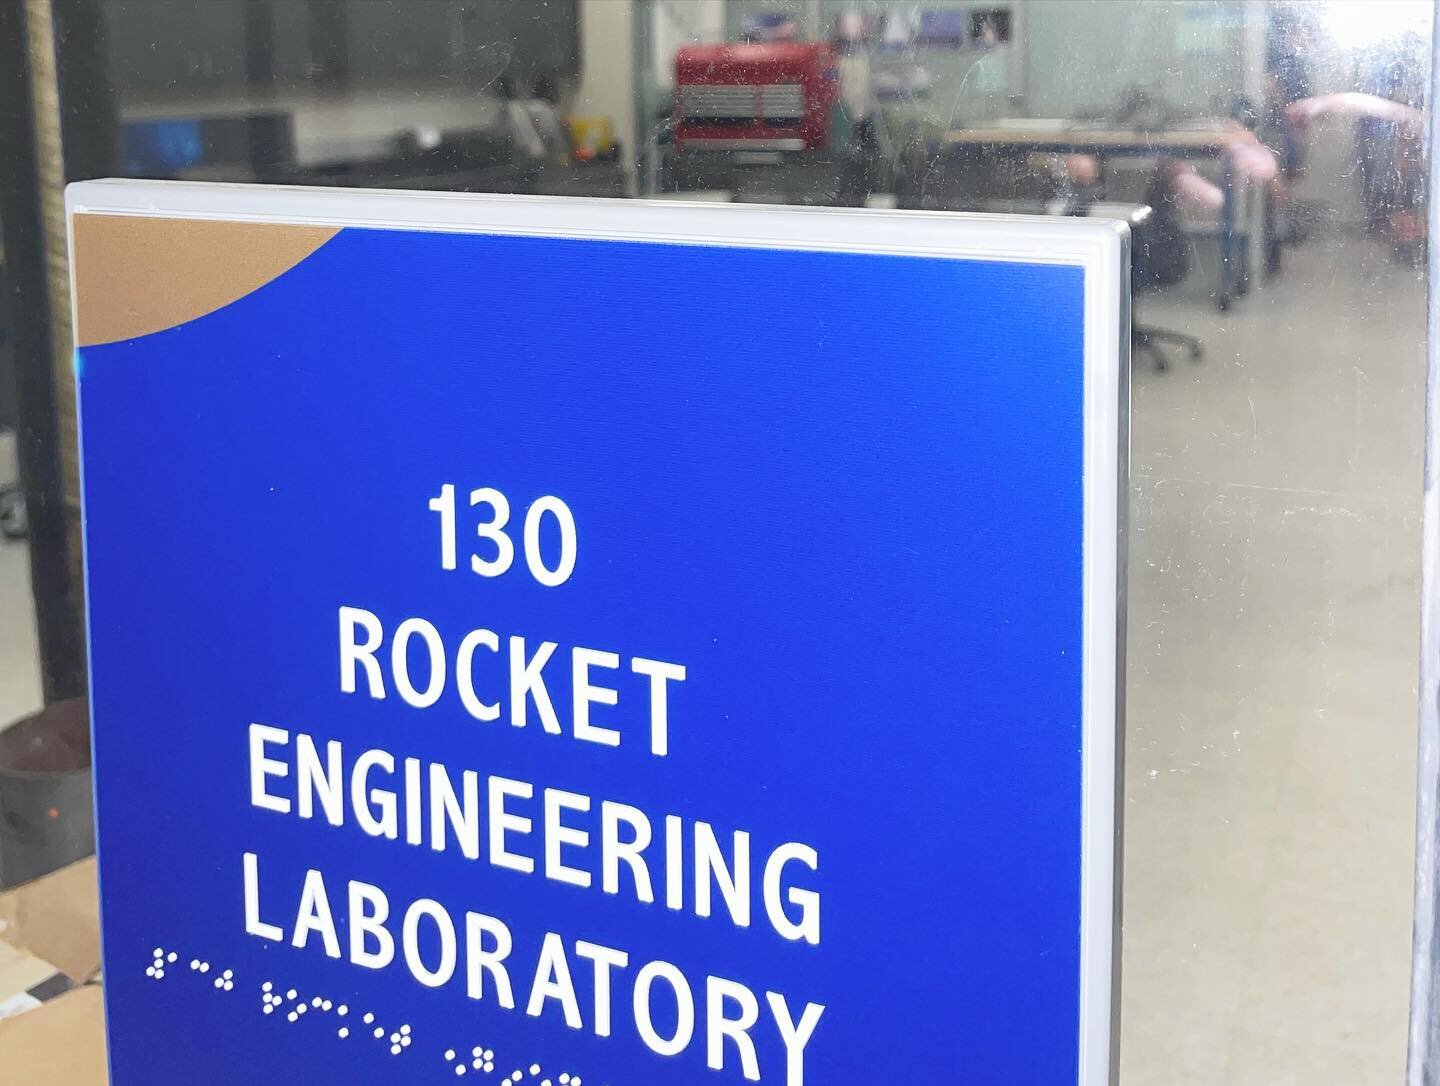 We&rsquo;re almost back!

ERFSEDS and ERPL administration has been working tirelessly over the past few days getting the rocket lab ready for our members. This lab is the room where it happens, it needs to be in good shape!

Looking forward to seeing